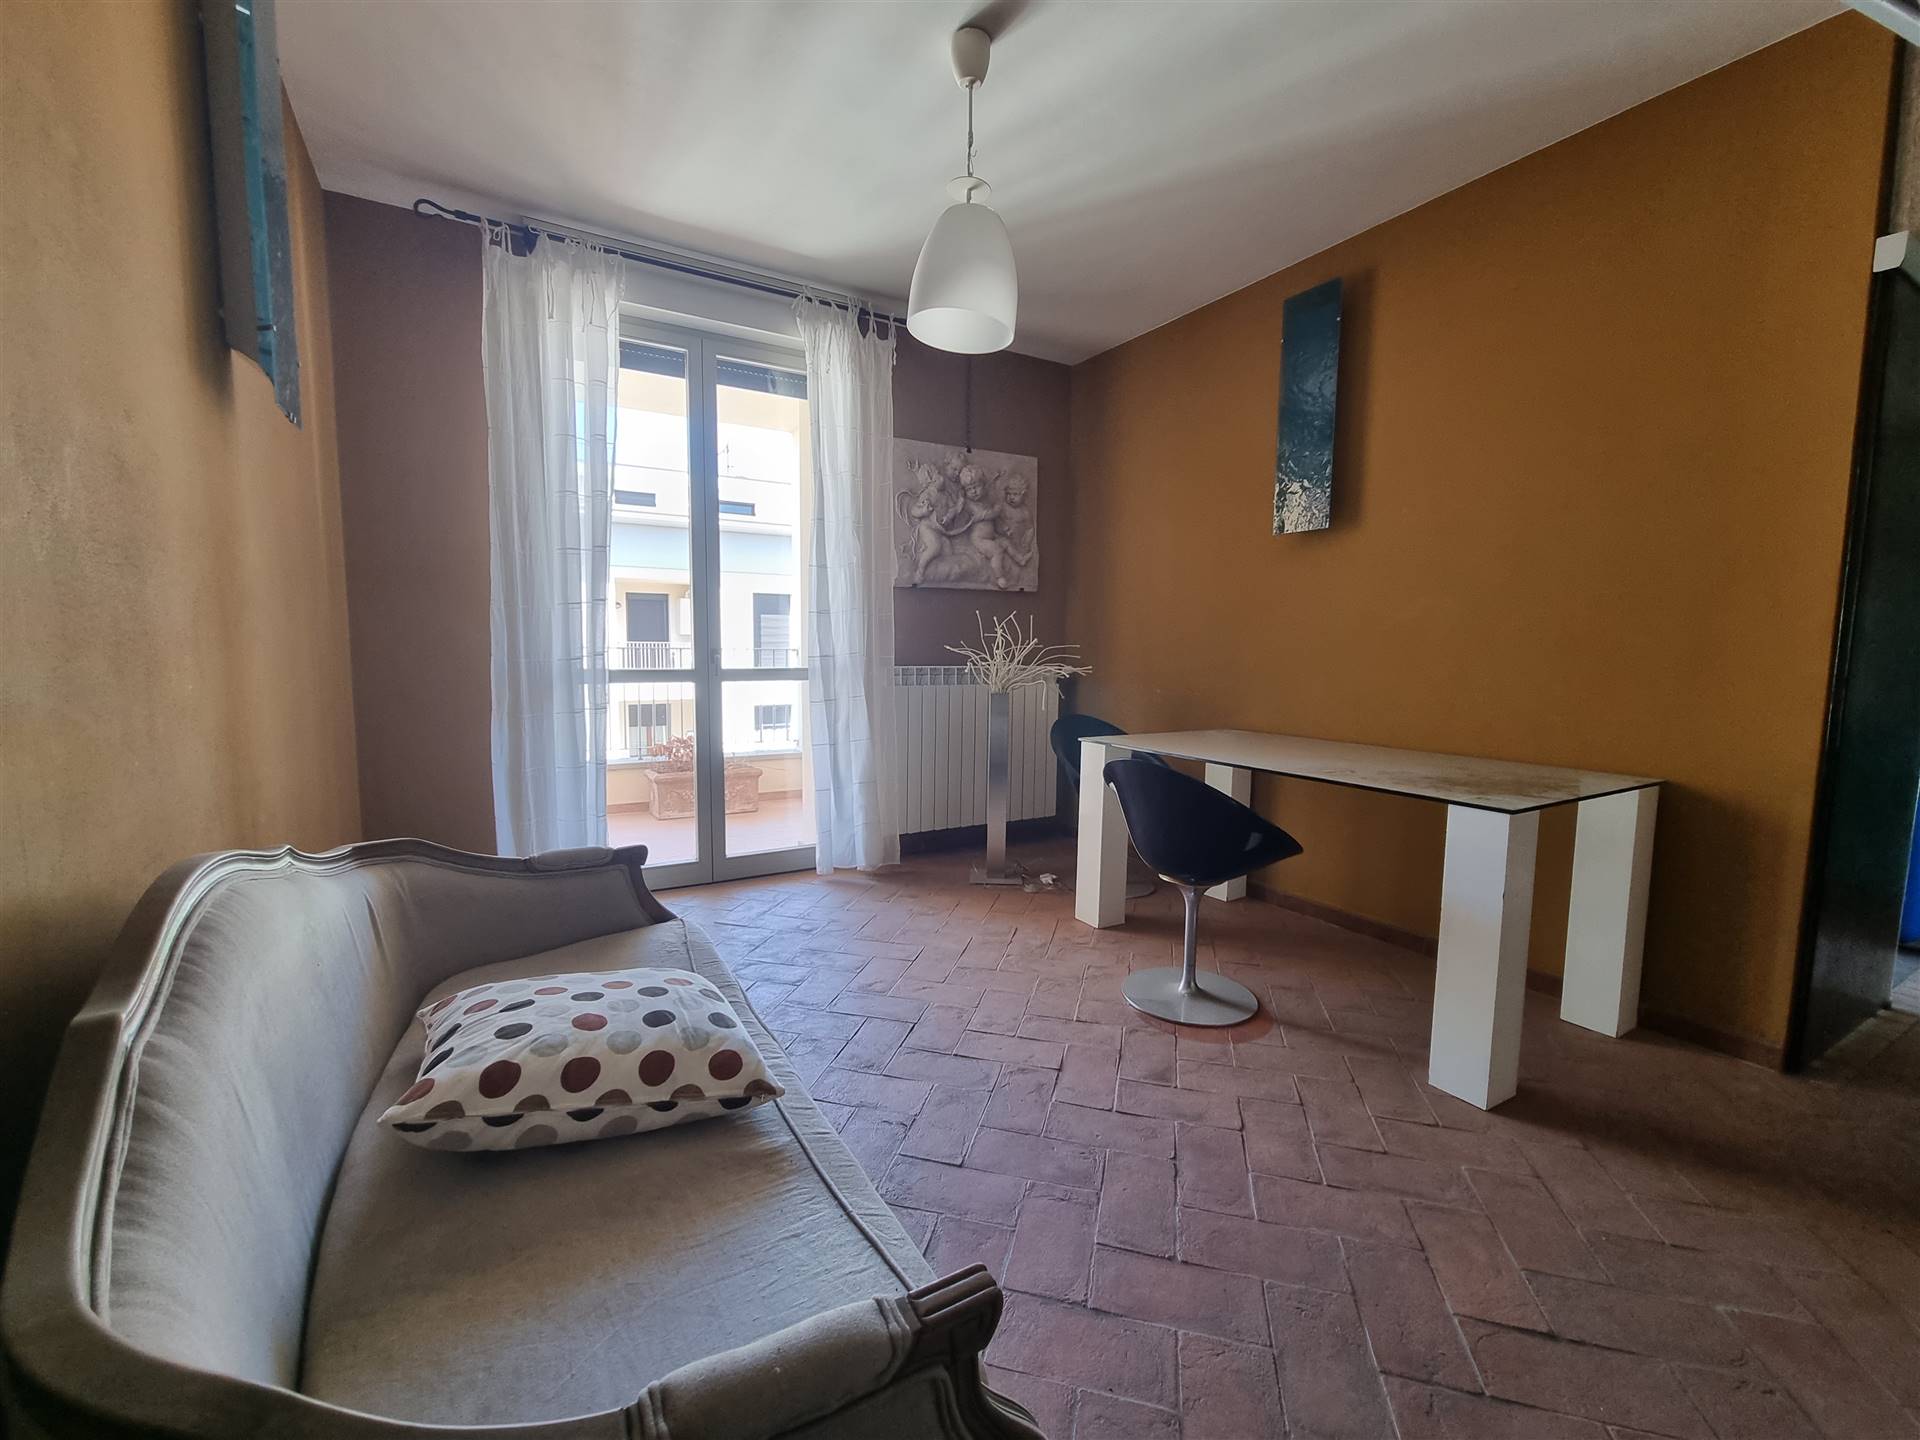 NOVOLI, FIRENZE, Apartment for rent of 100 Sq. mt., Excellent Condition, Heating Individual heating system, Energetic class: F, Epi: 127 kwh/m2 year, 